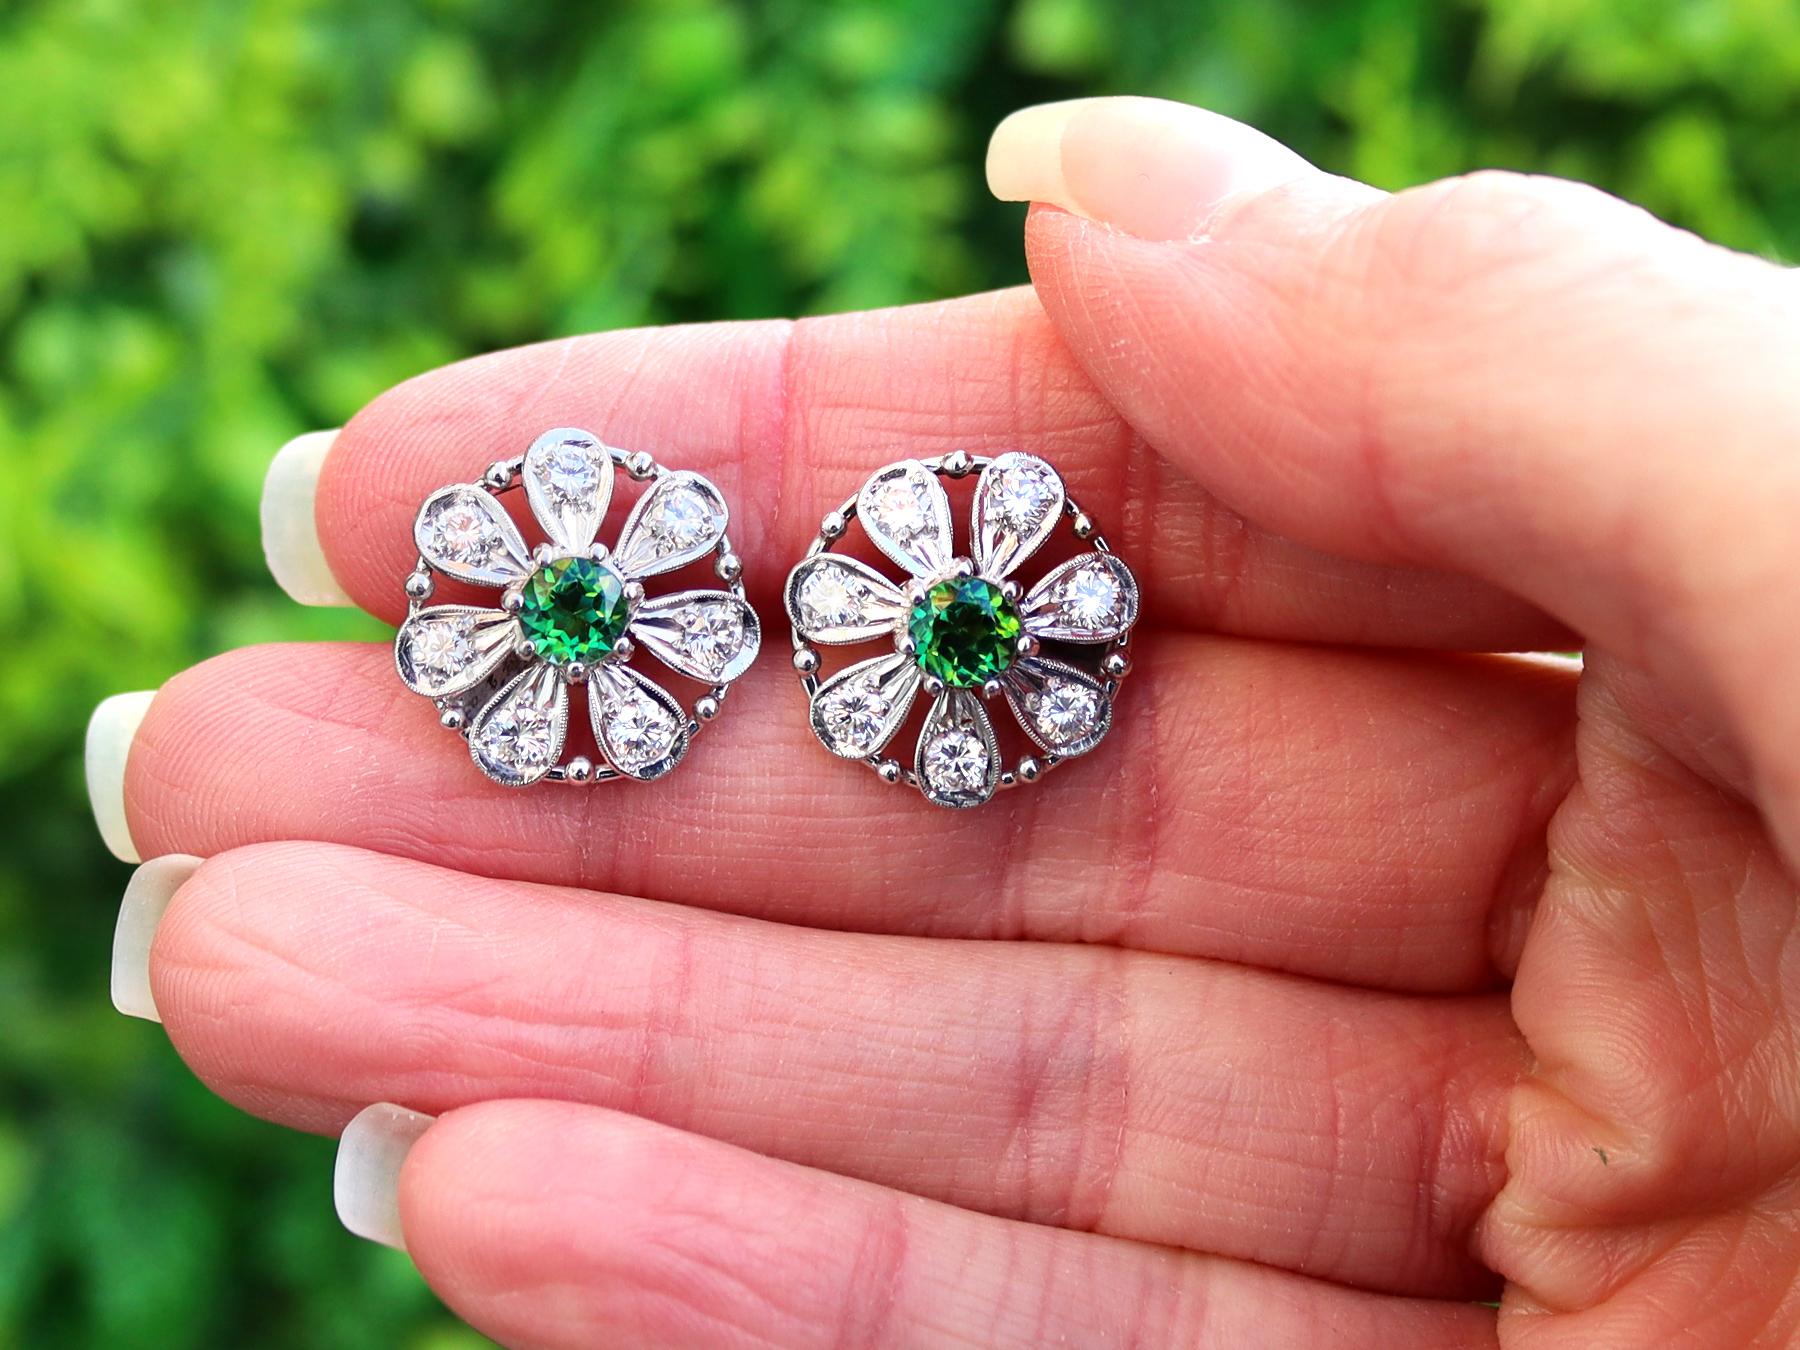 A fine and impressive pair of vintage 0.80 carat tourmaline and 0.80 carat diamond, 14 karat white gold earrings; part of our vintage jewelry collections.

These impressive vintage tourmaline and diamond earrings have been crafted in 14k white